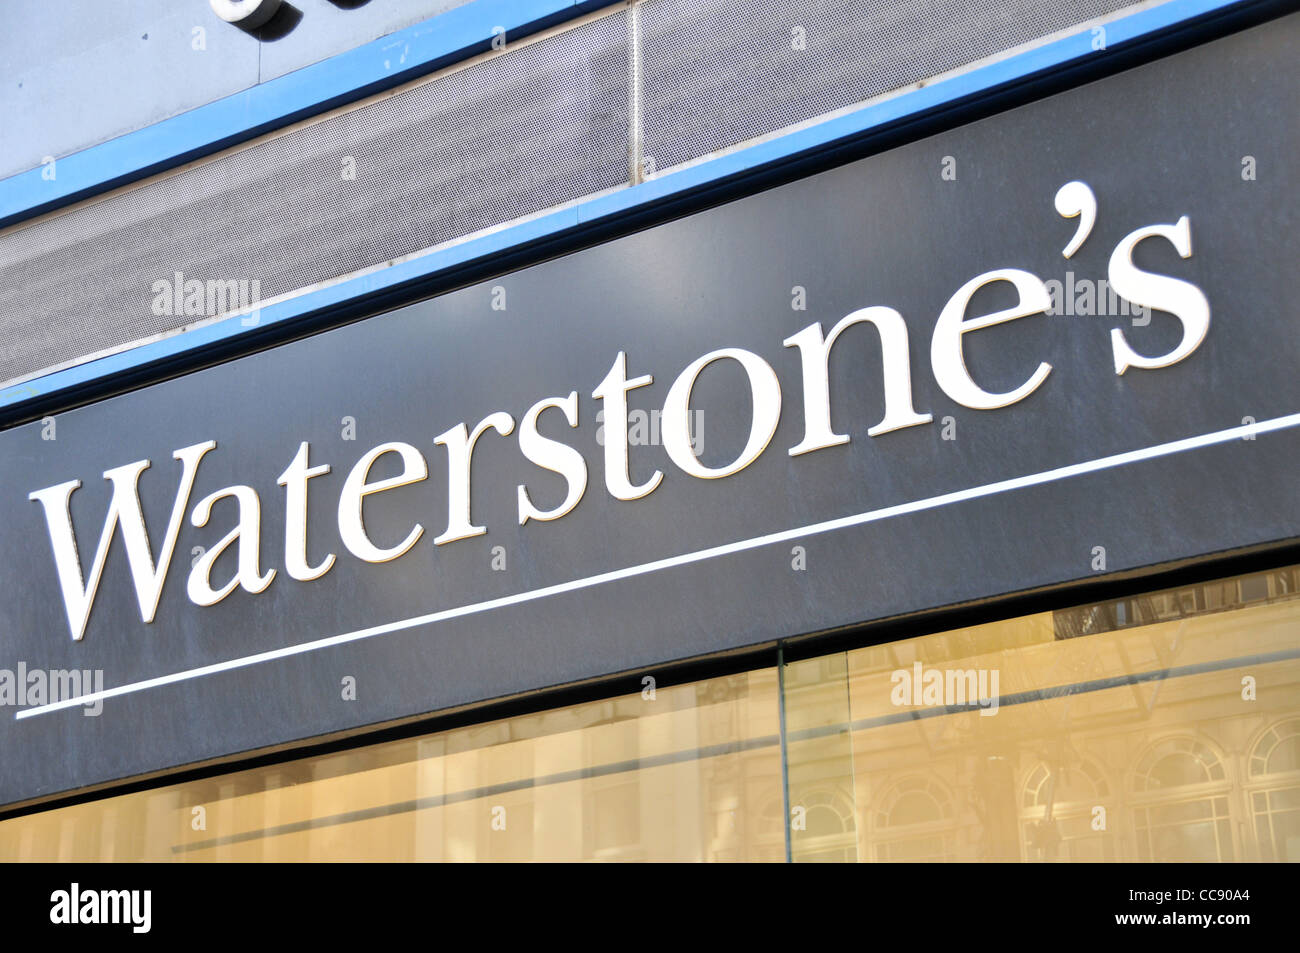 Waterstone's books librairie apostrophe Waterstones Banque D'Images